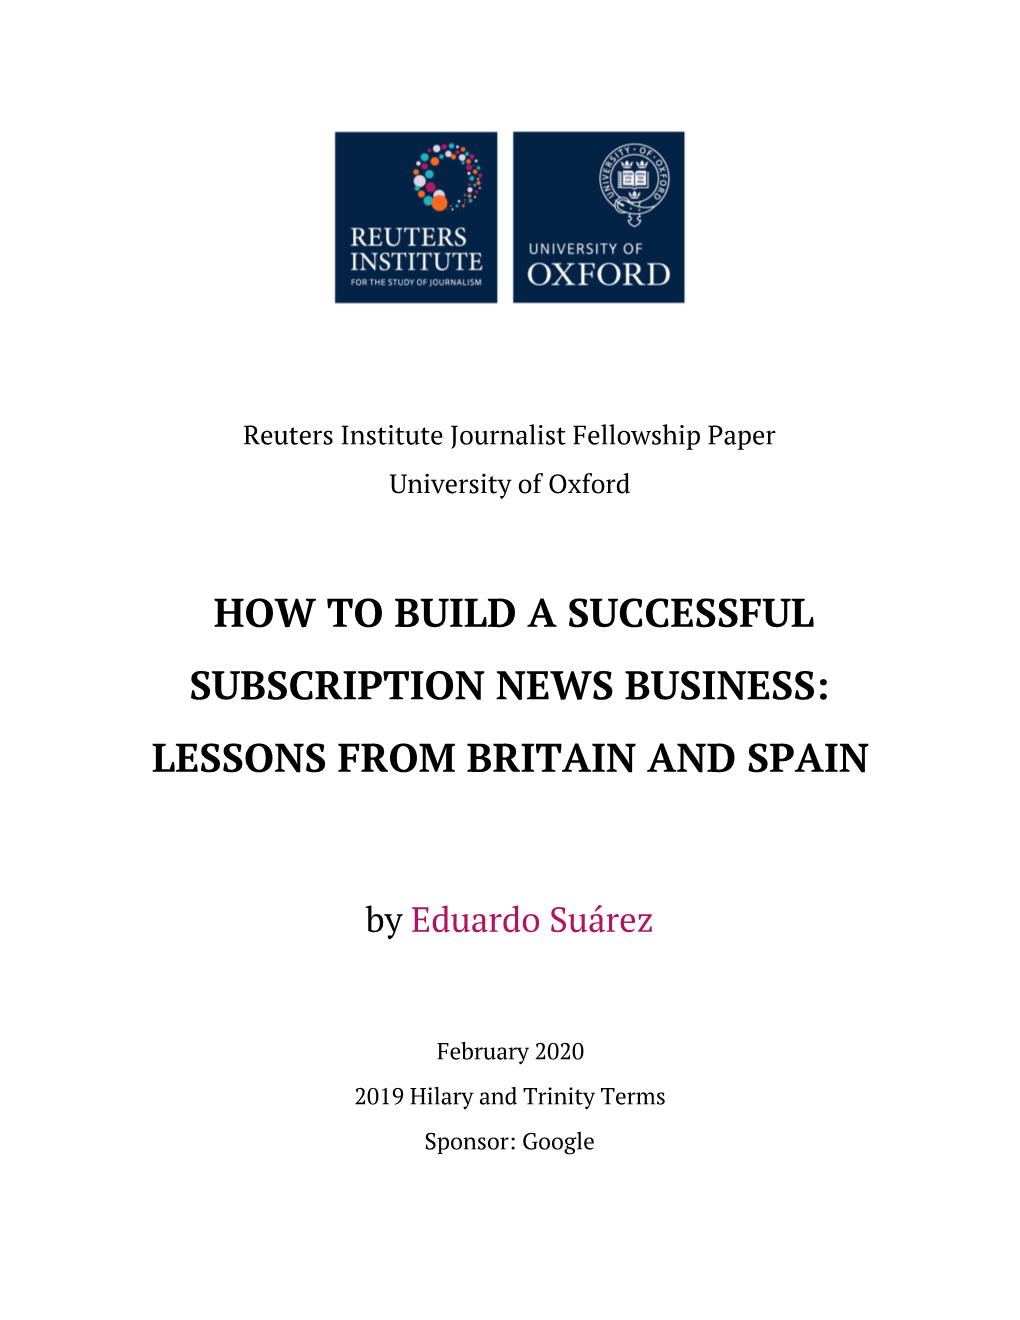 ​How to Build a Successful Subscription News Business: Lessons from Britain and Spain